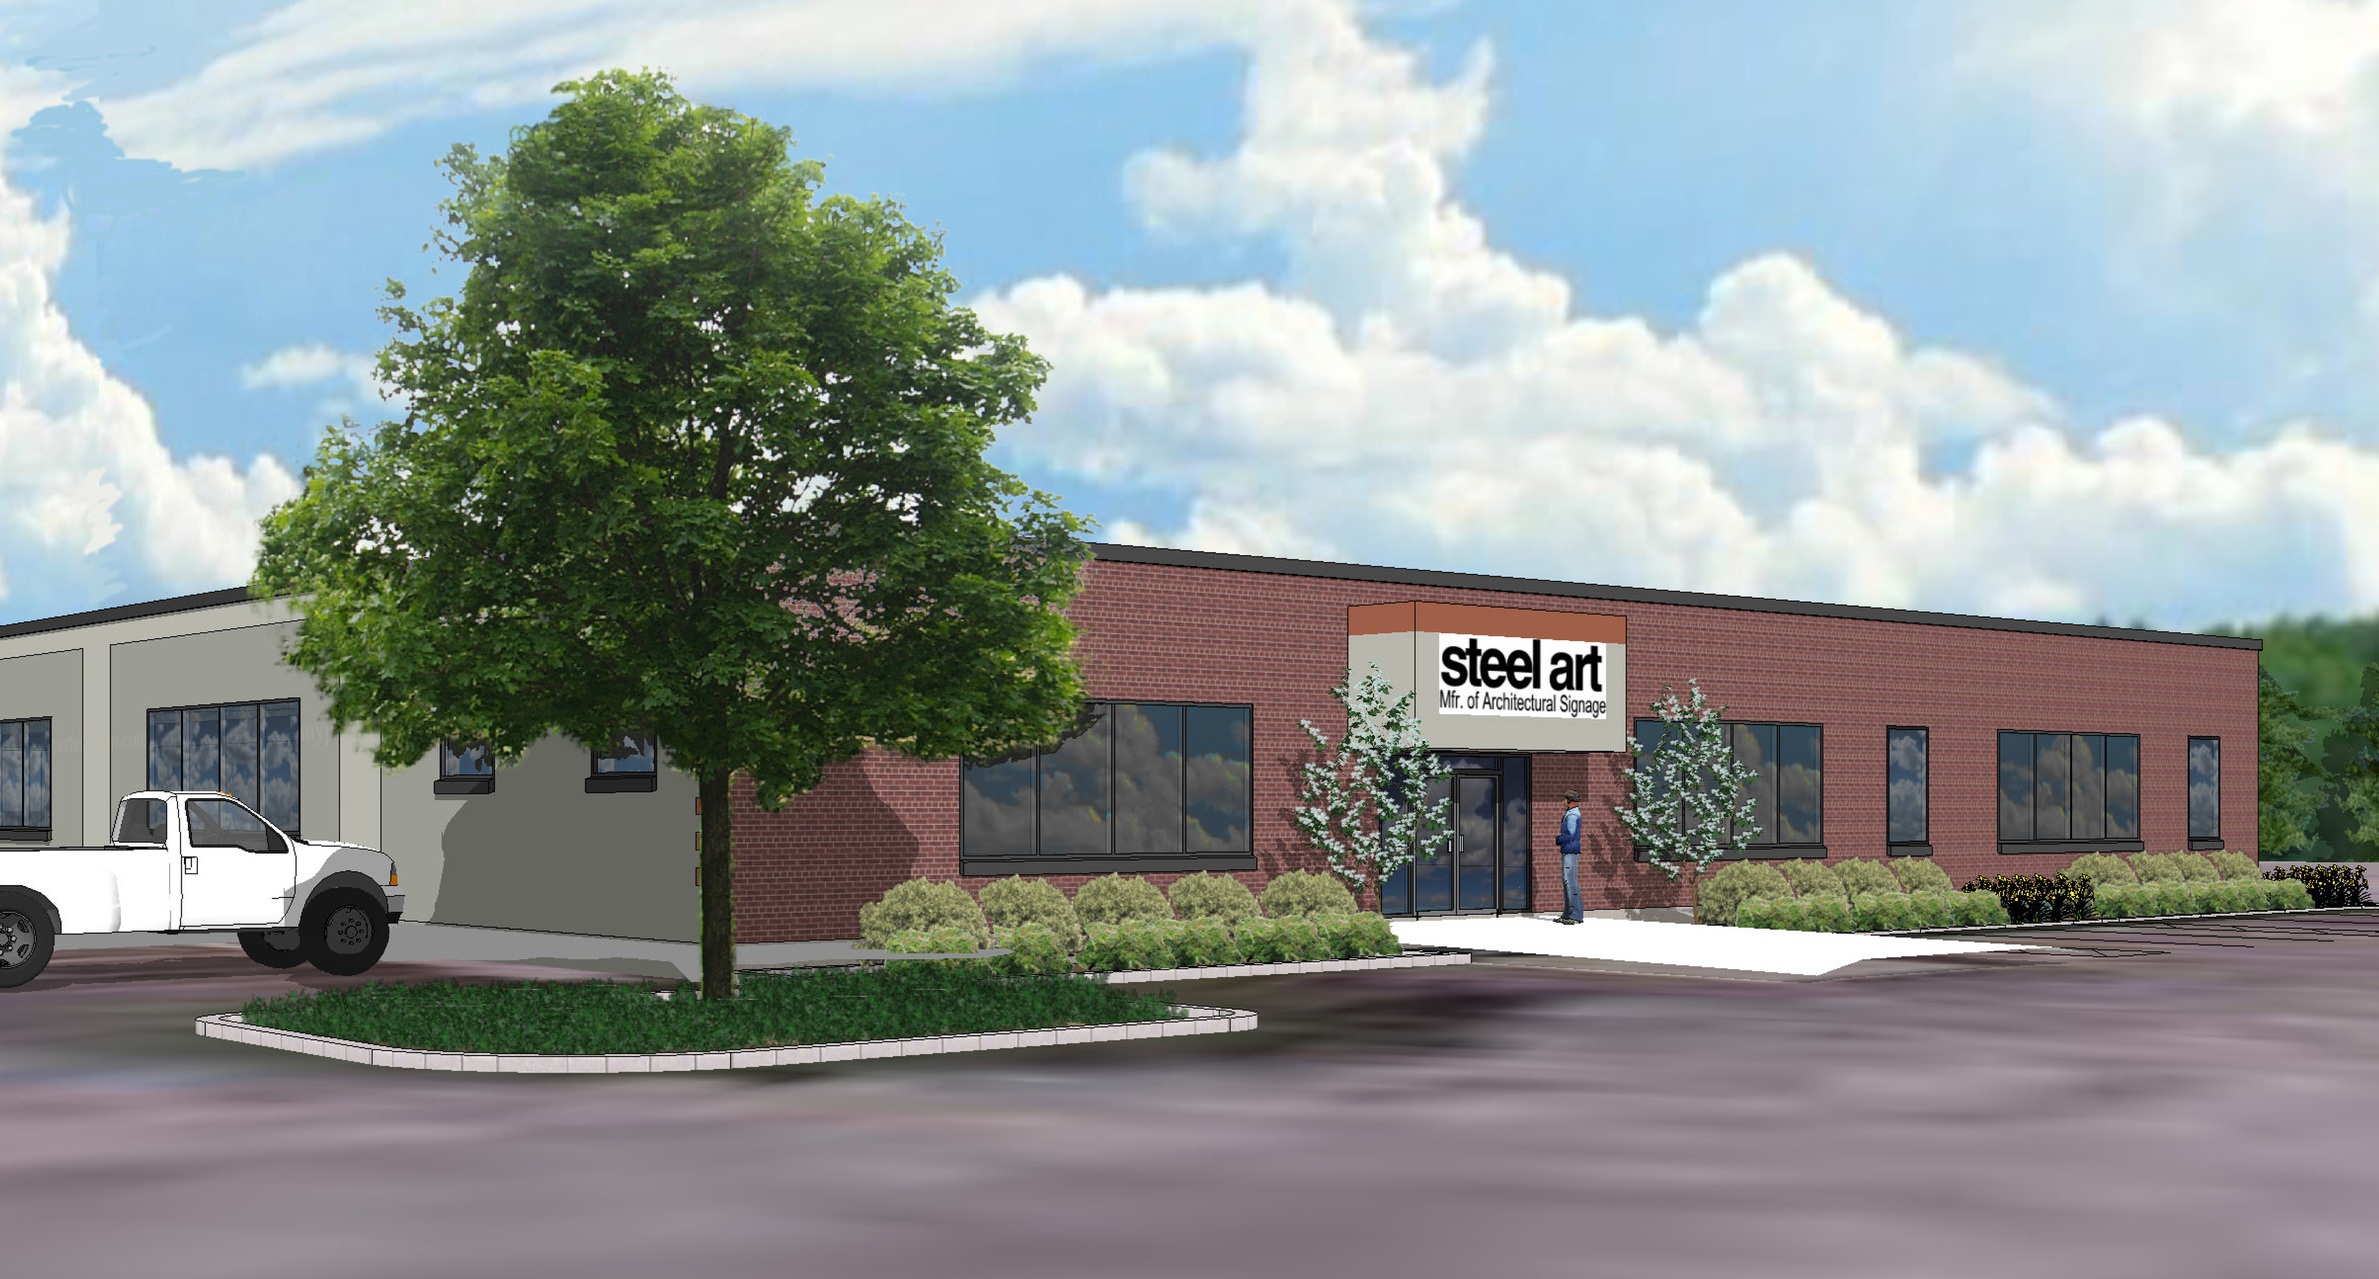 Steel Art’s state-of-the-art manufacturing facility in Norwood, Massachusetts